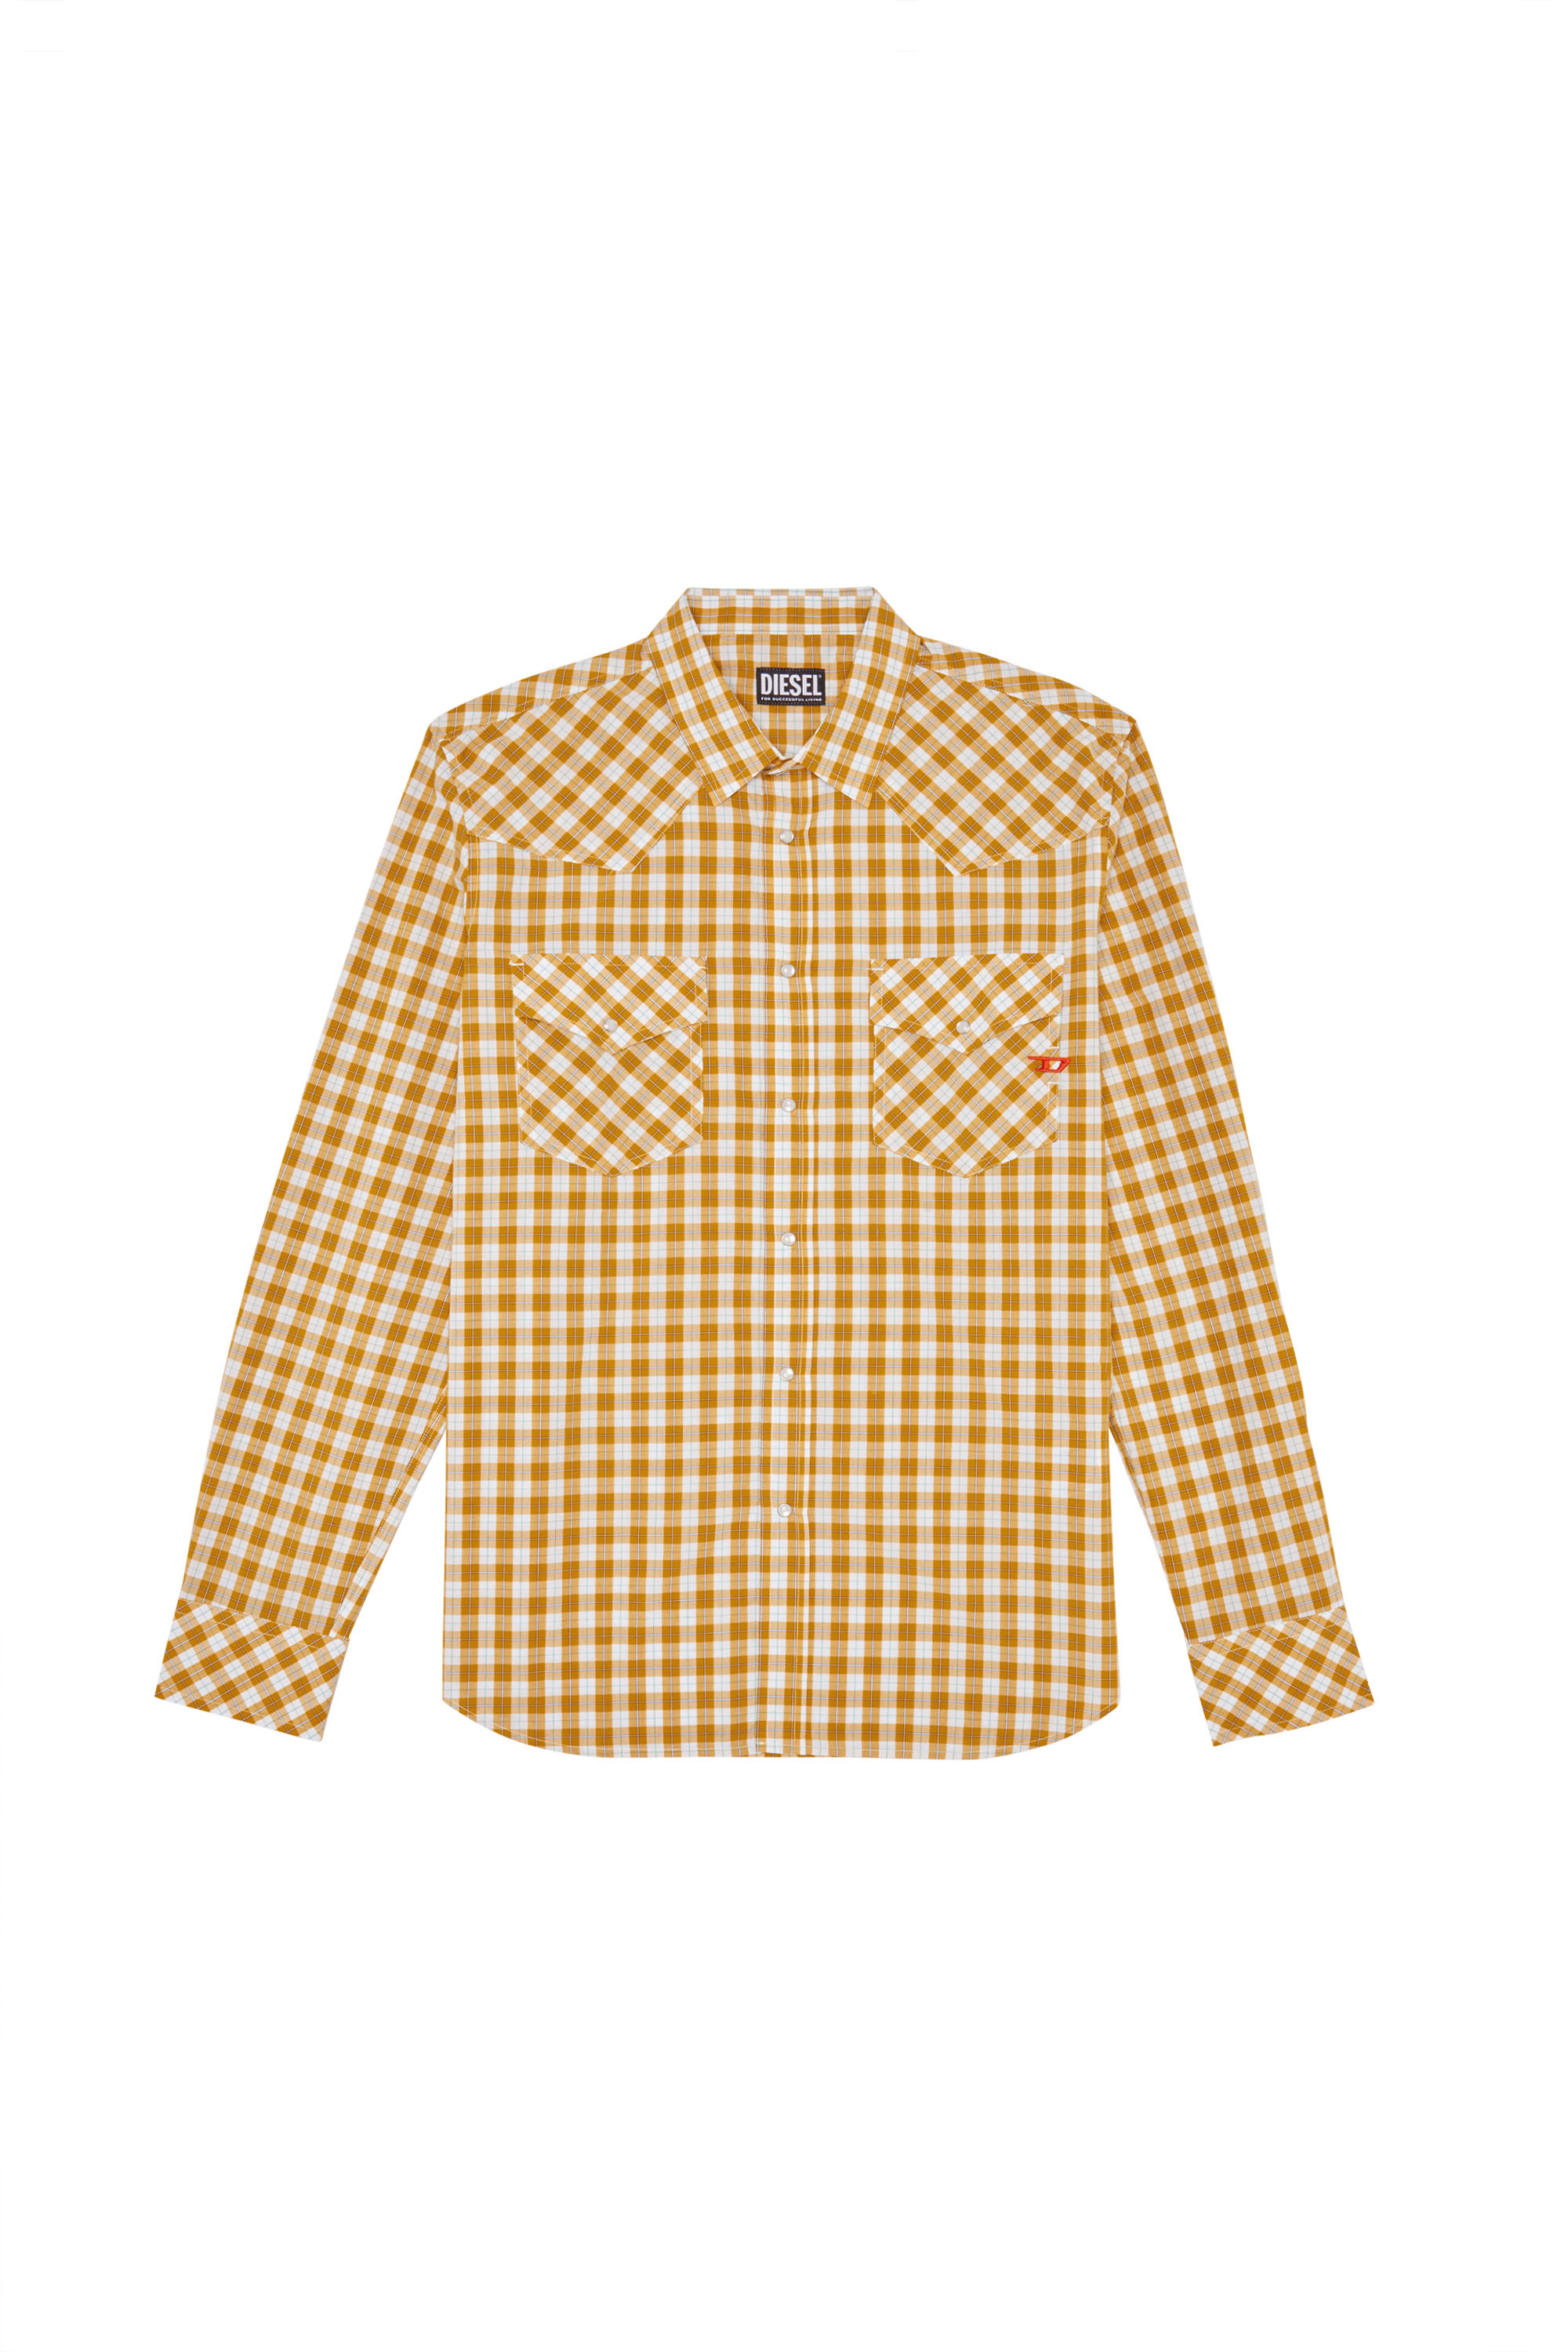 S-EAST-LONG-CL, White/Yellow - Shirts